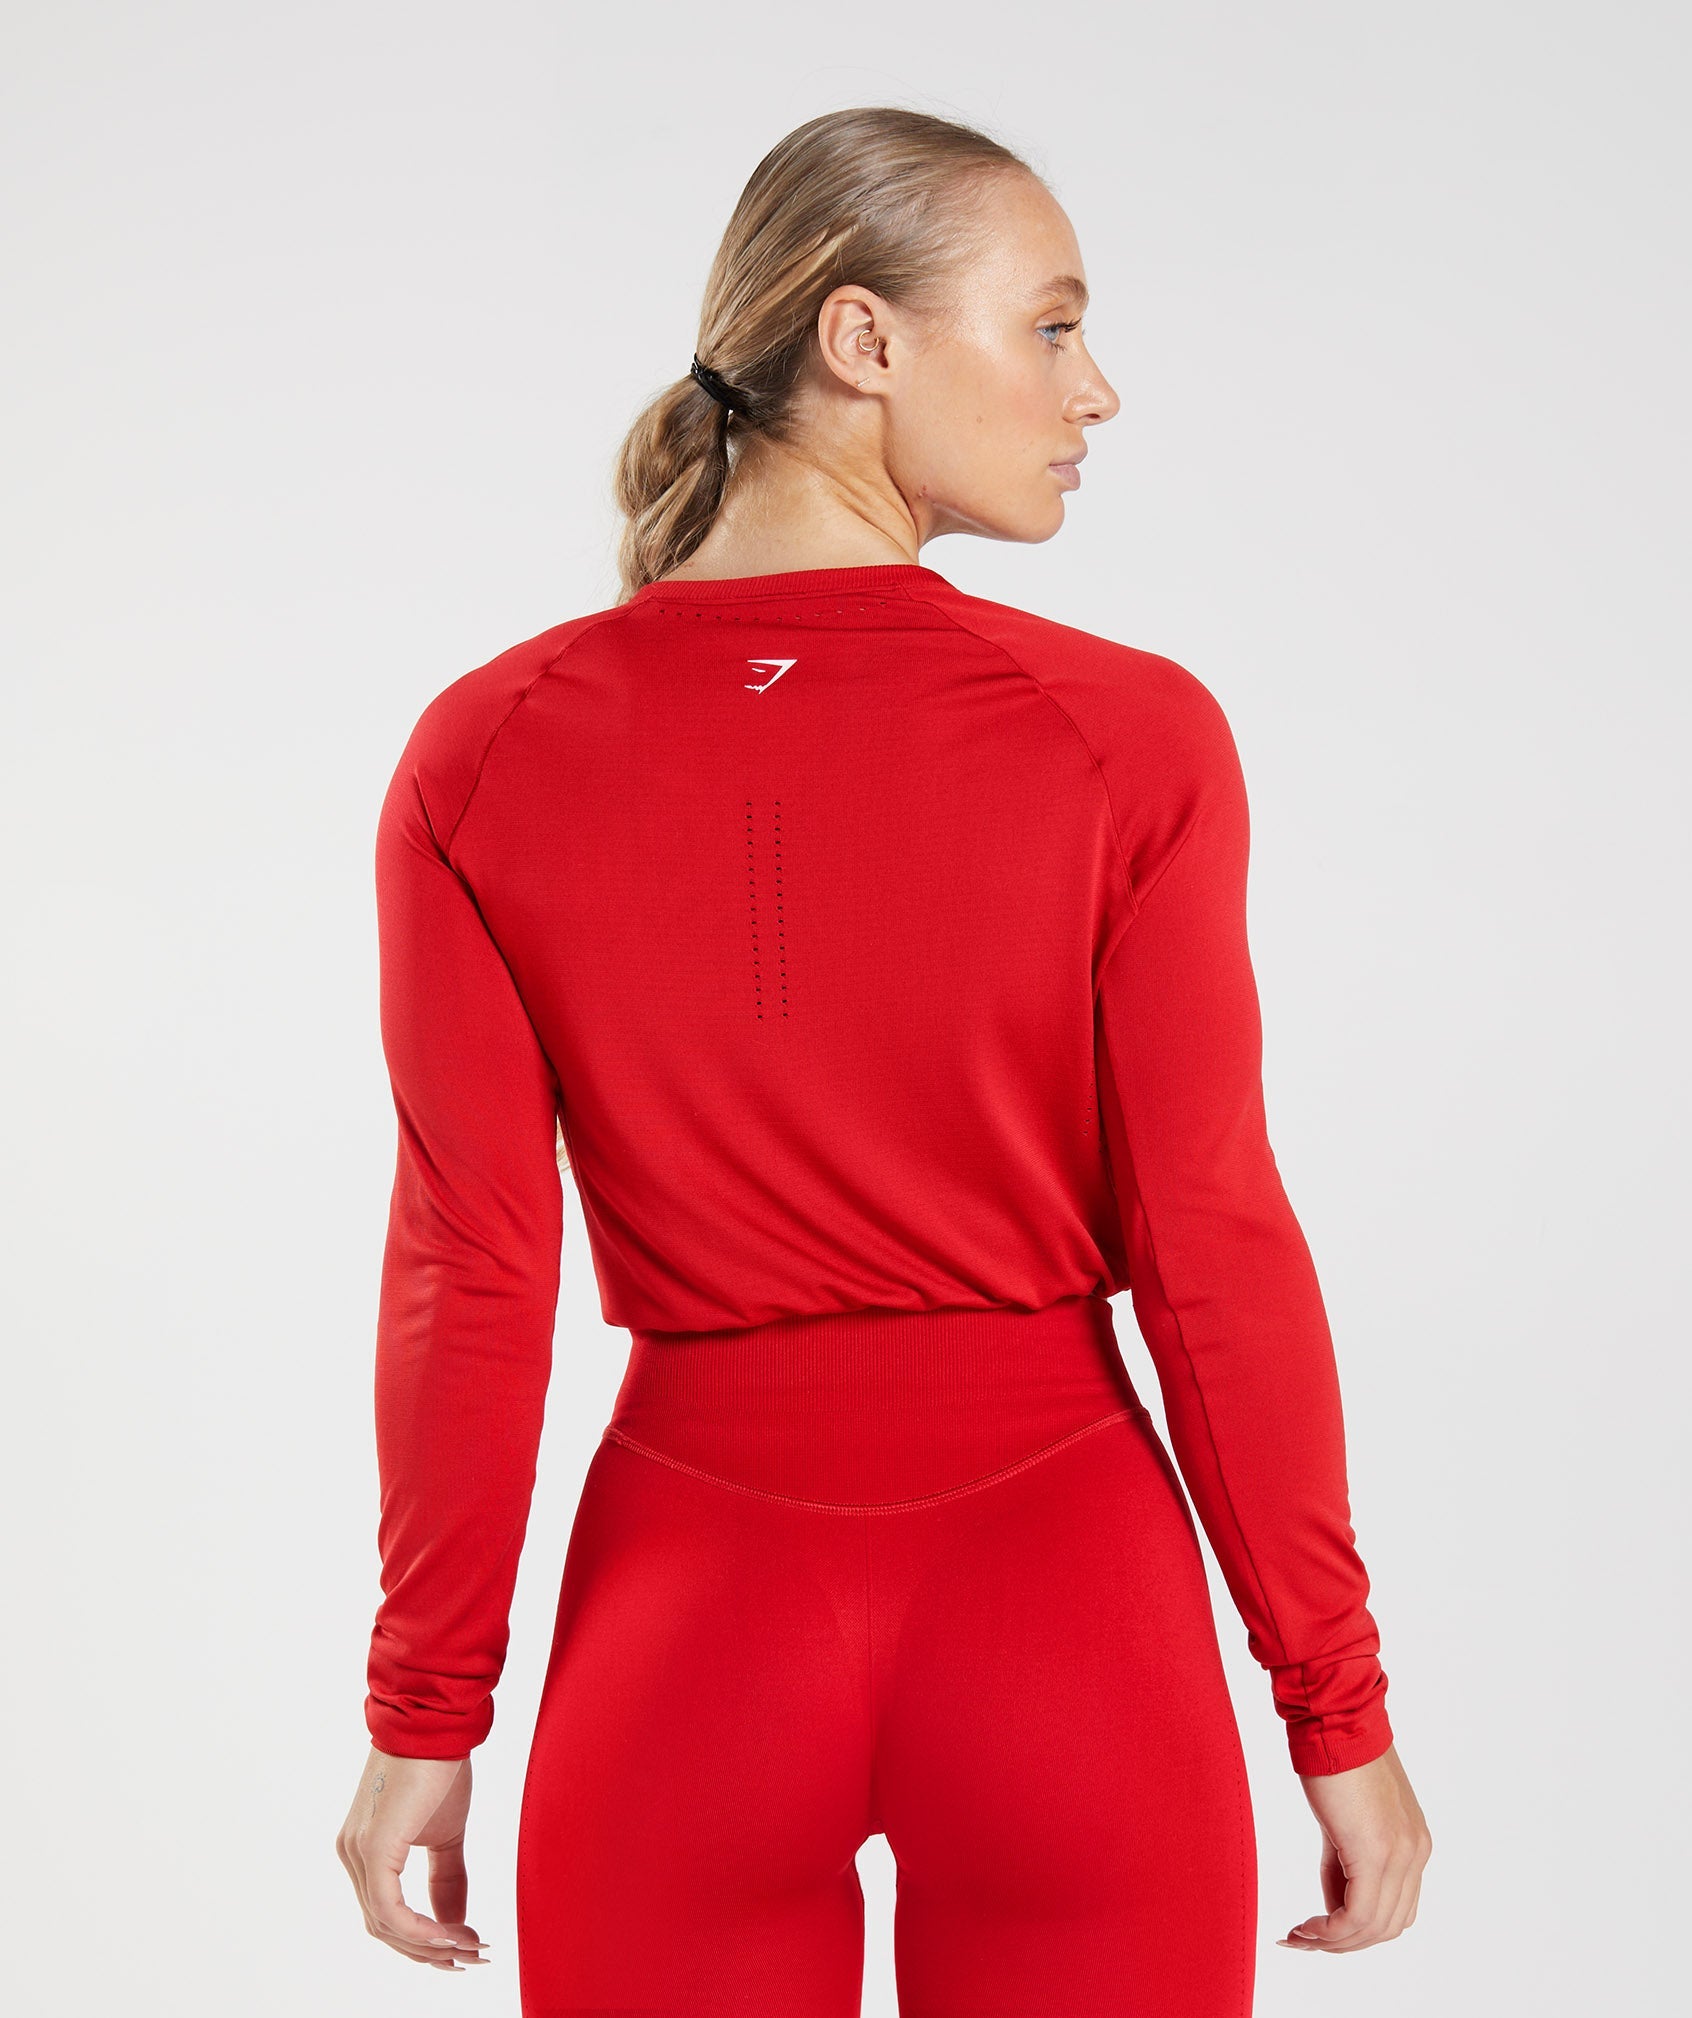 Sweat Seamless Long Sleeve Crop Top in Salsa Red - view 2